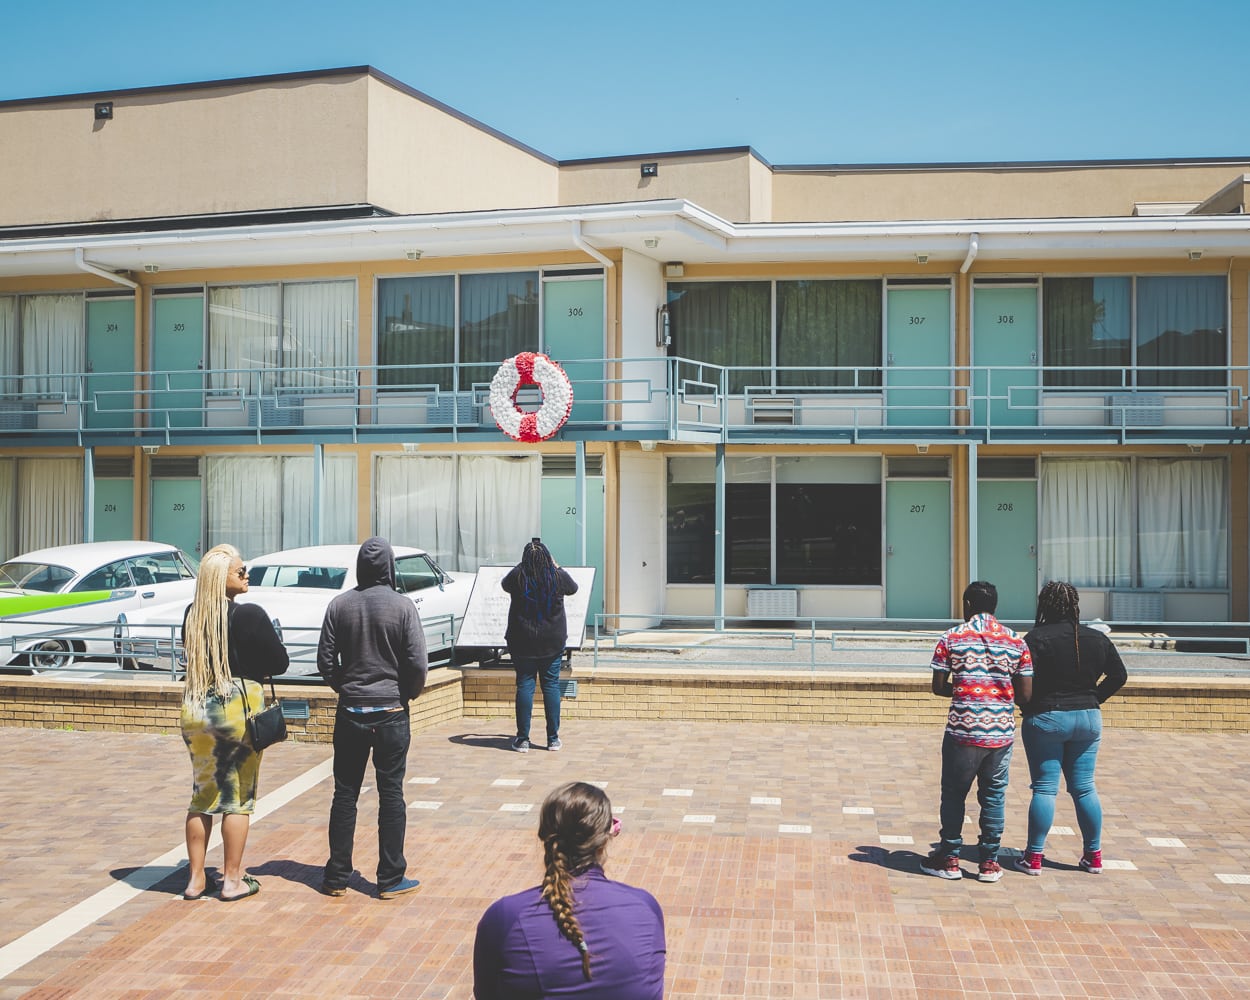 Social Distancing at The Lorraine Motel where MLK was assassinated in Memphis, Tennessee 